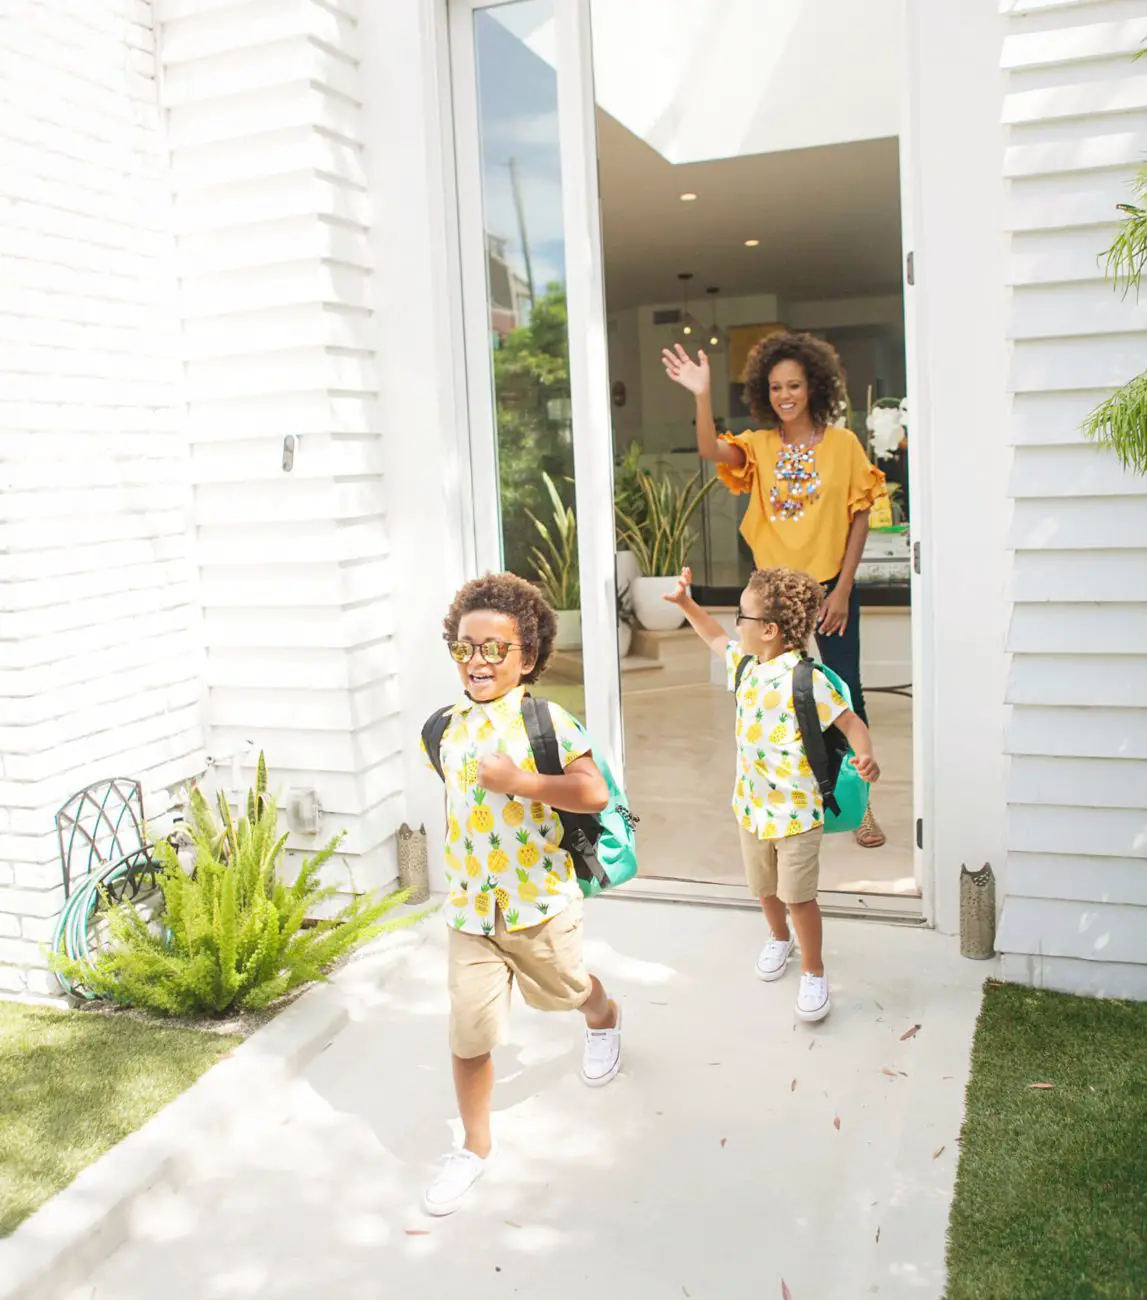 9 Exceptional Window Safety Tips for Families With Children